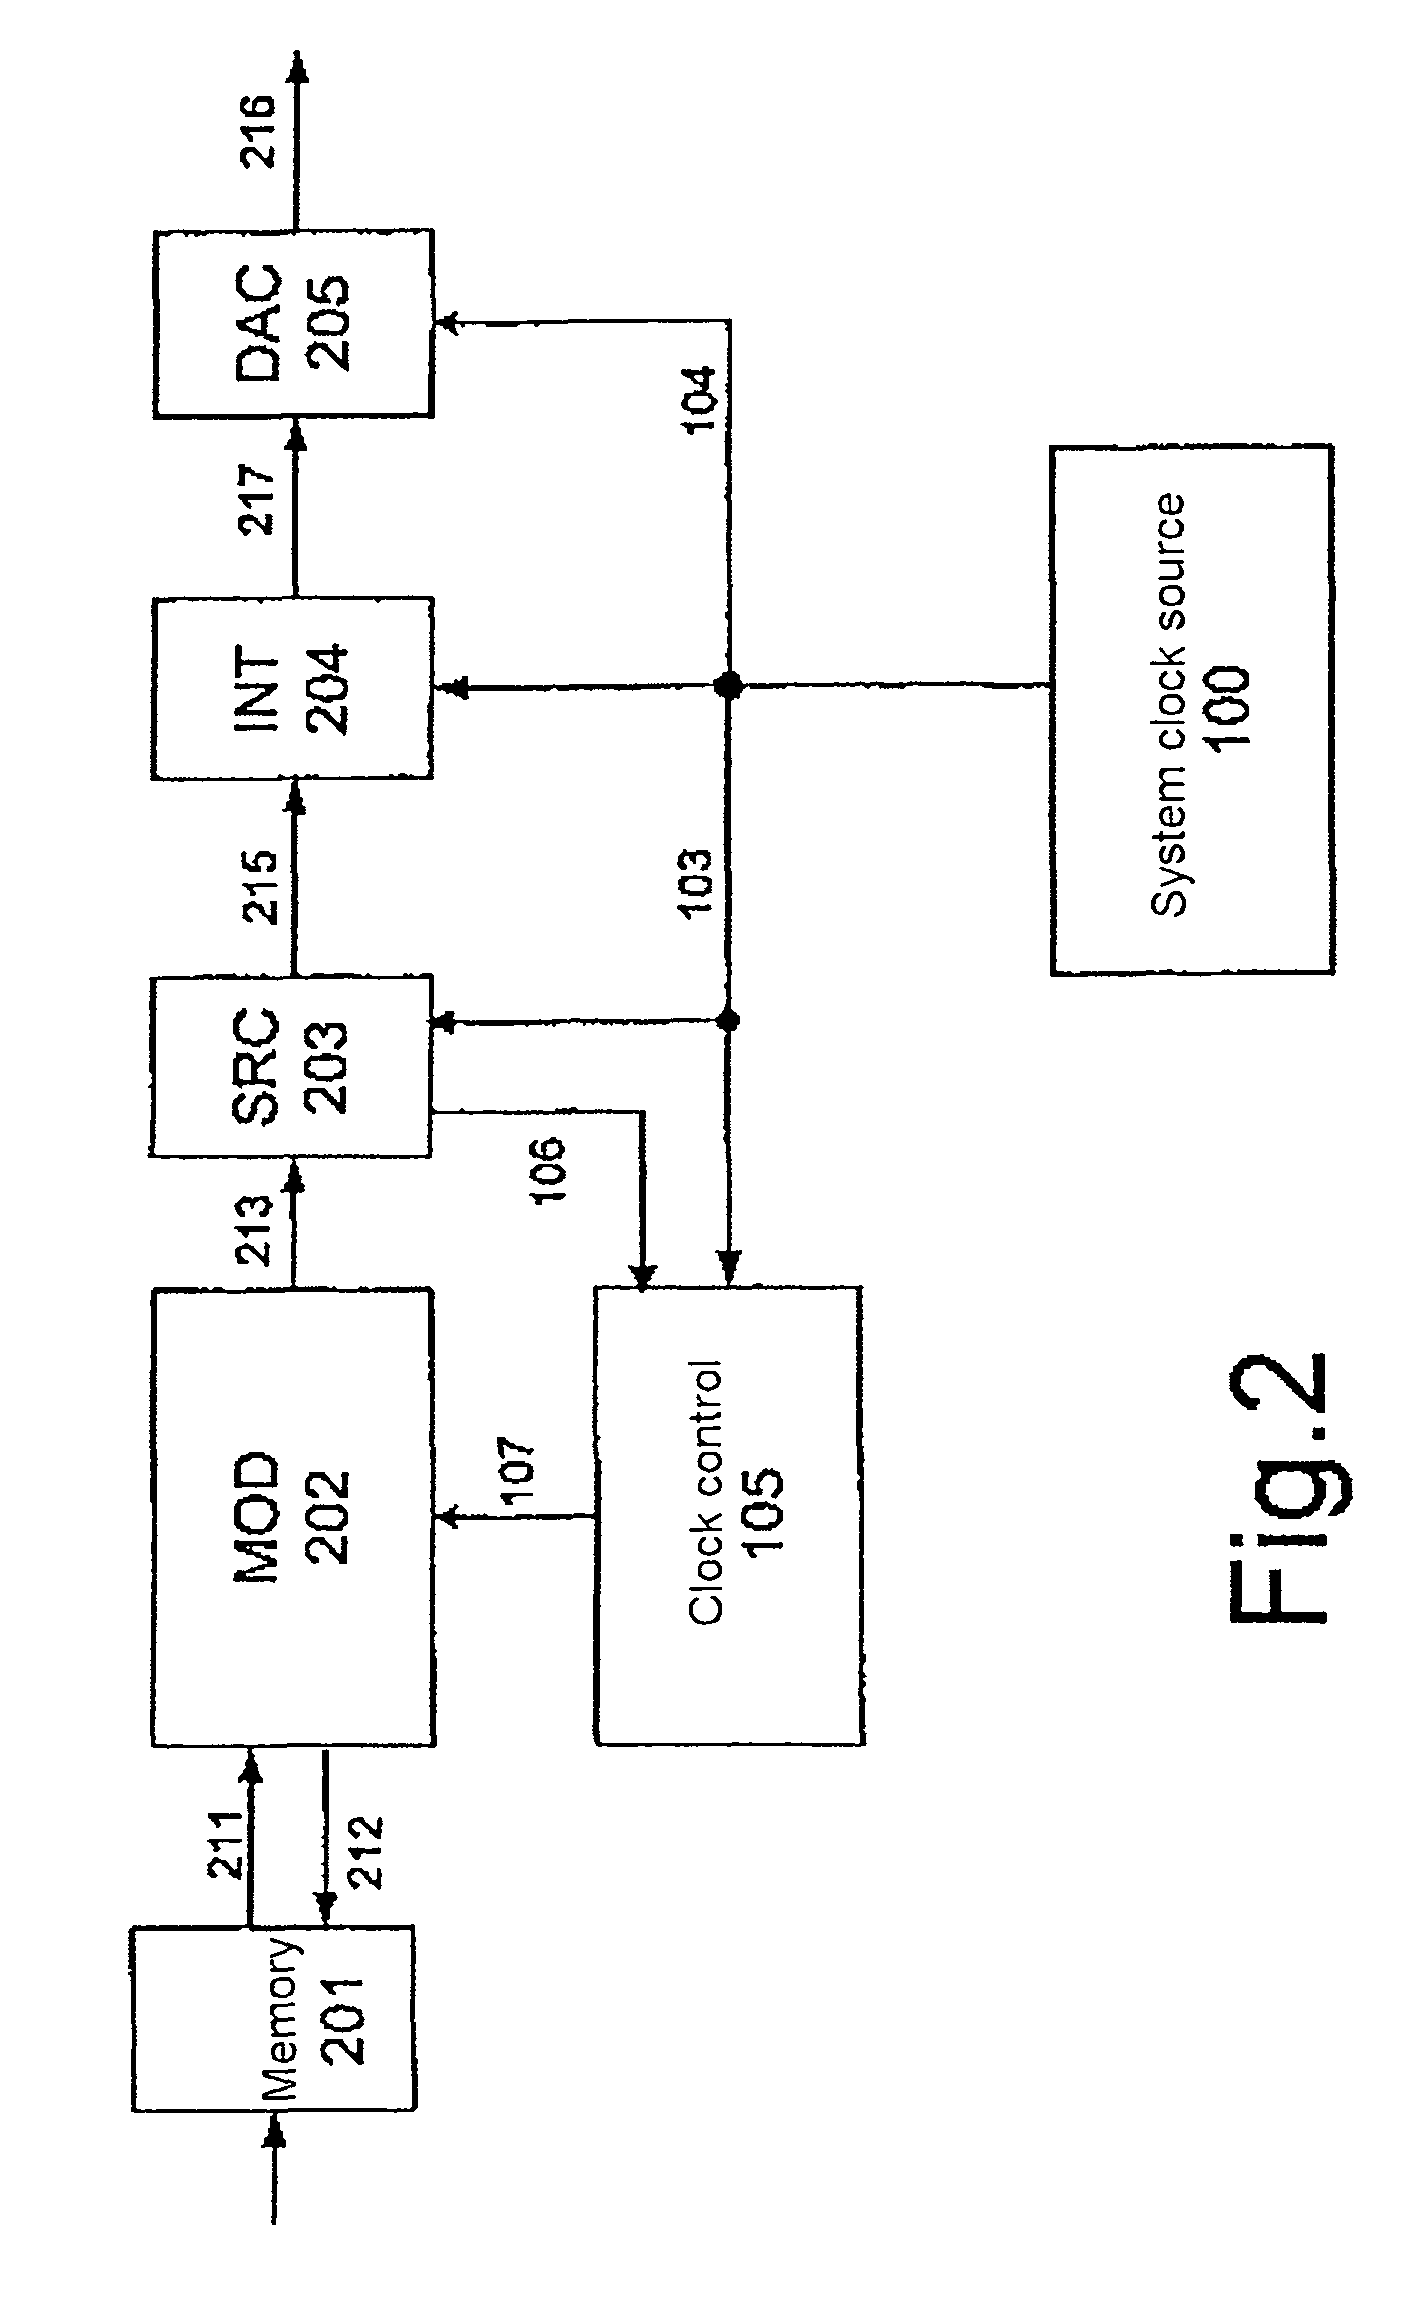 Clock control of transmission-signal processing devices in mobile radio terminal devices